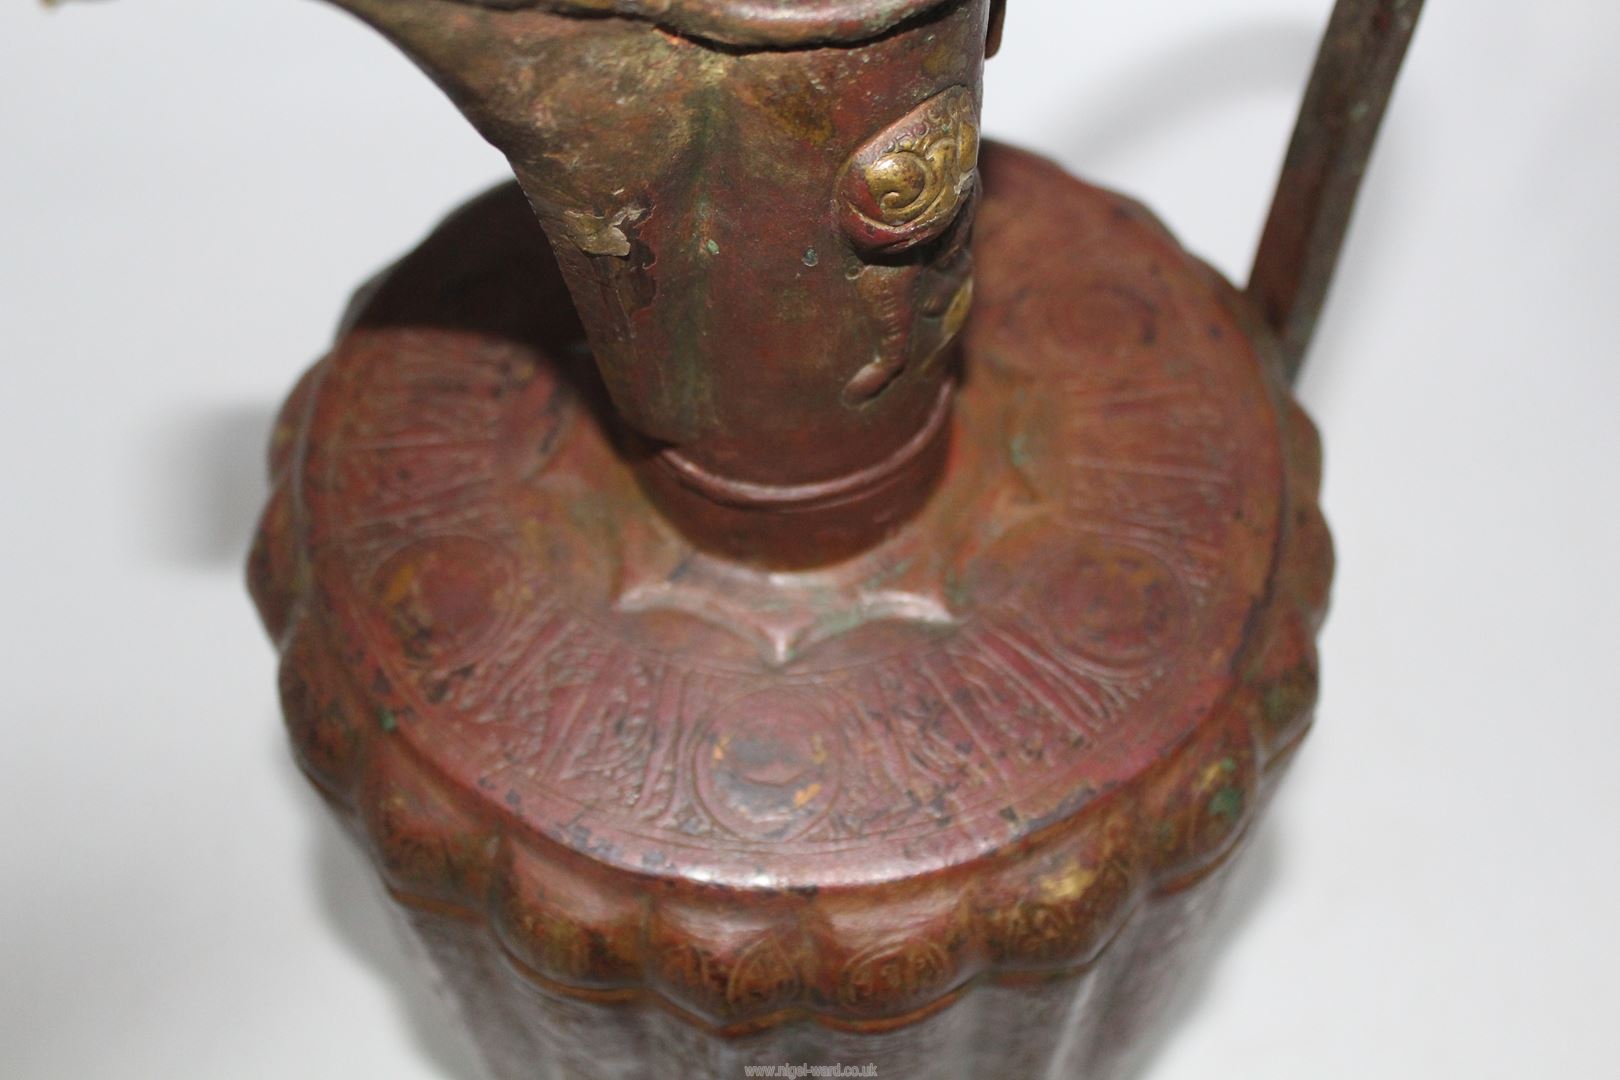 A Khorassan bronze ewer, 12th - 13th c. - Image 6 of 7